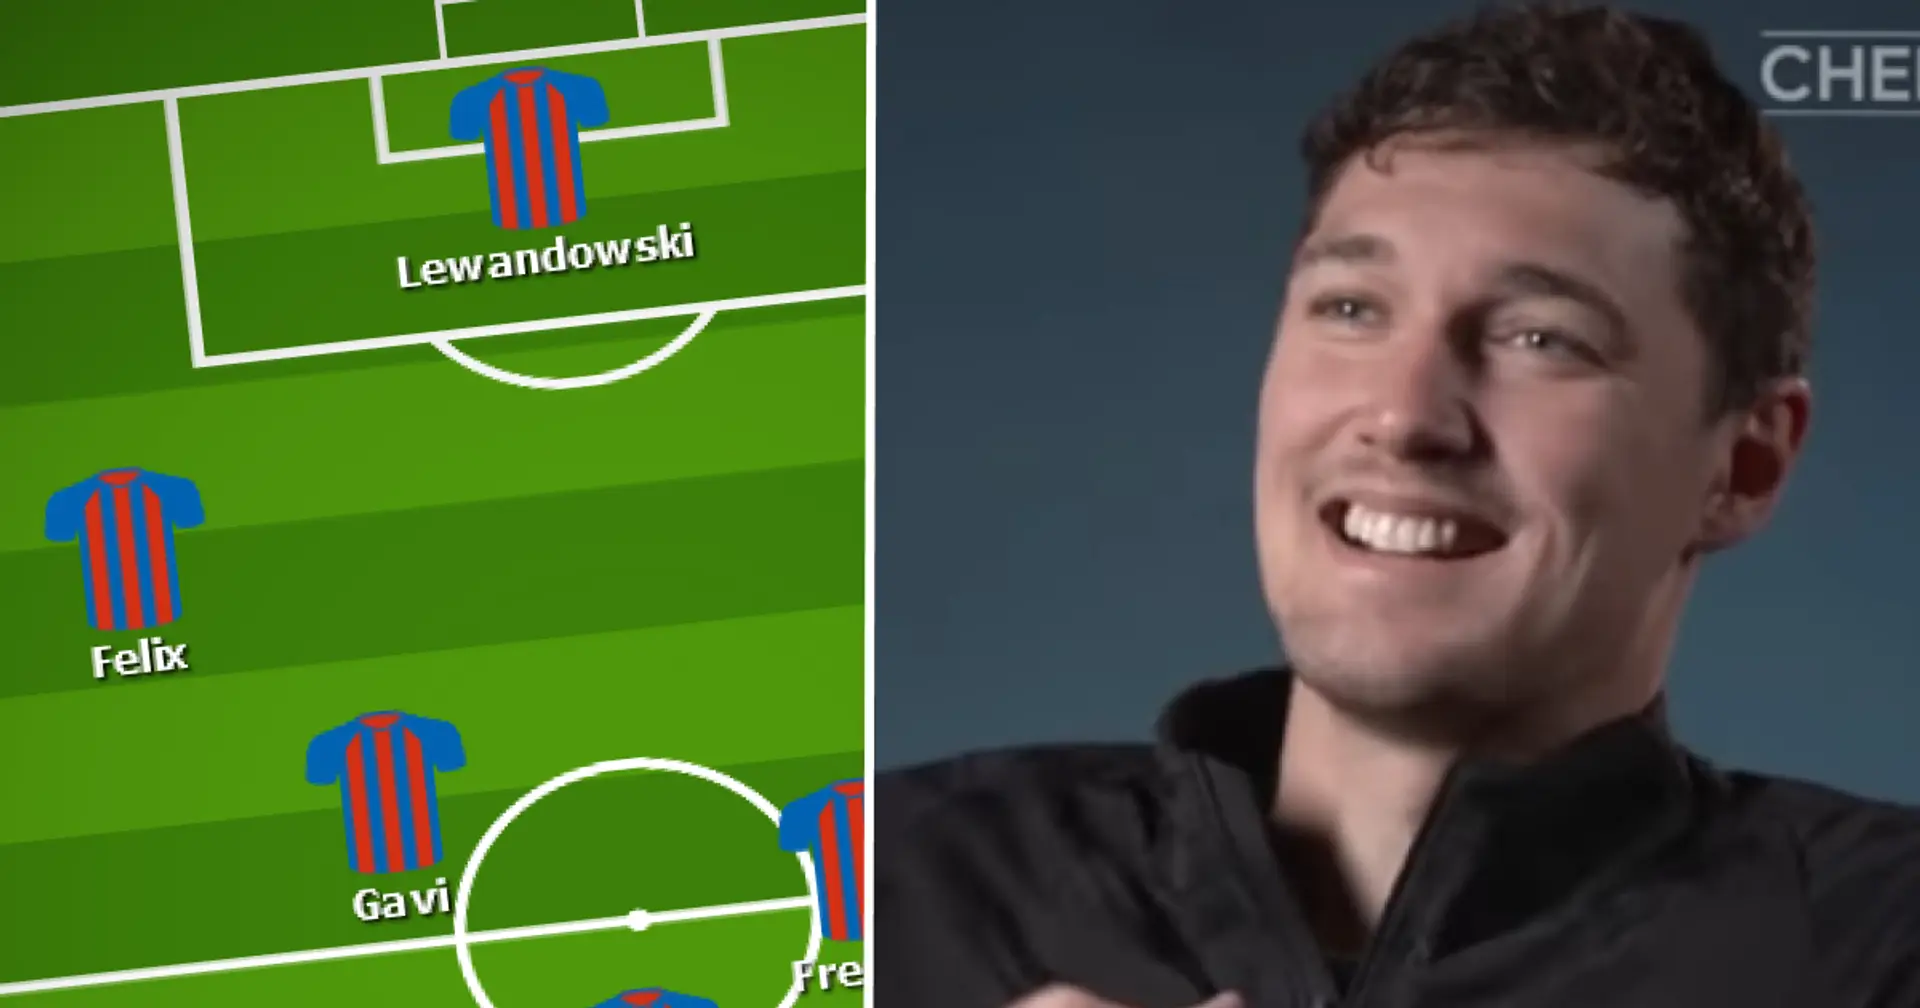 How Barca can lineup with Christensen as a midfielder – he already spoke about playing there 